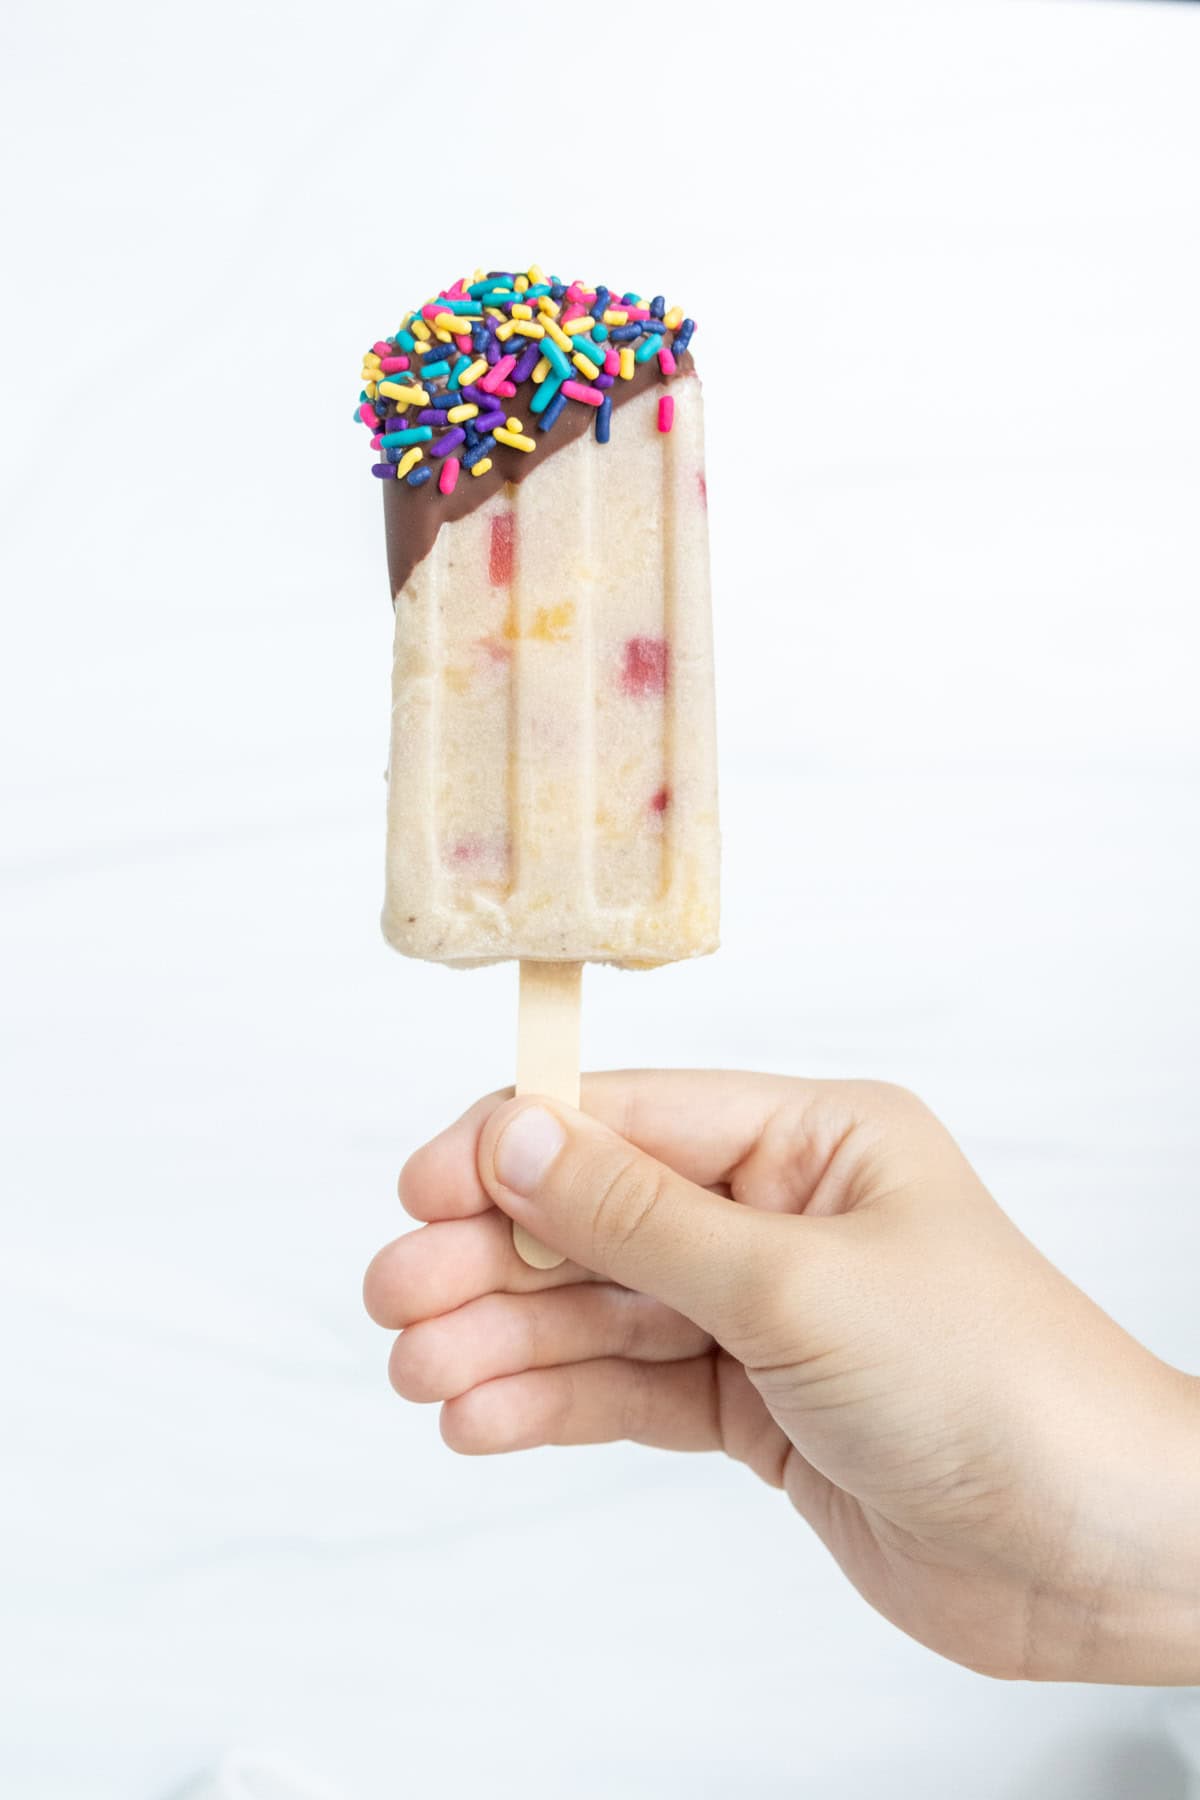 A hand holding a popsicle partially dipped in chocolate and covered with colorful sprinkles.